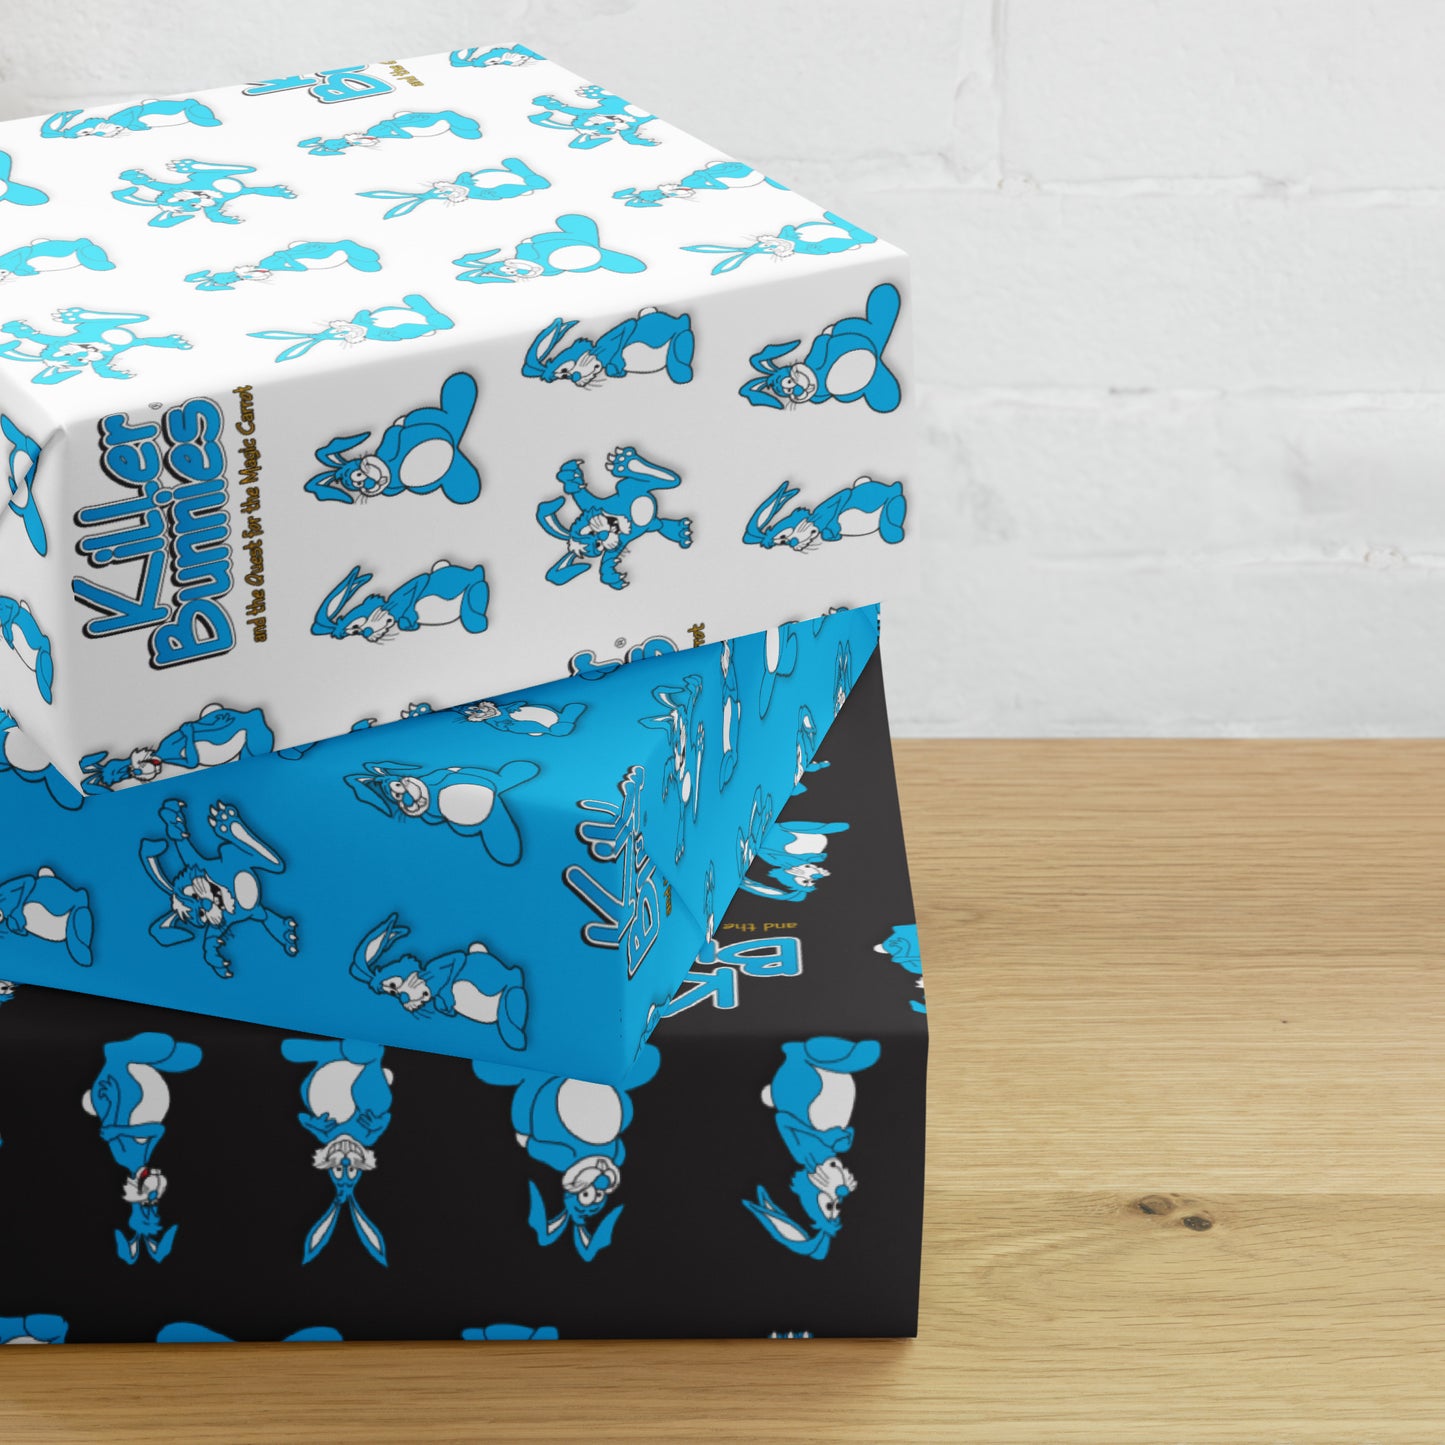 Killer Bunnies Wrapping Paper Sheets on packages